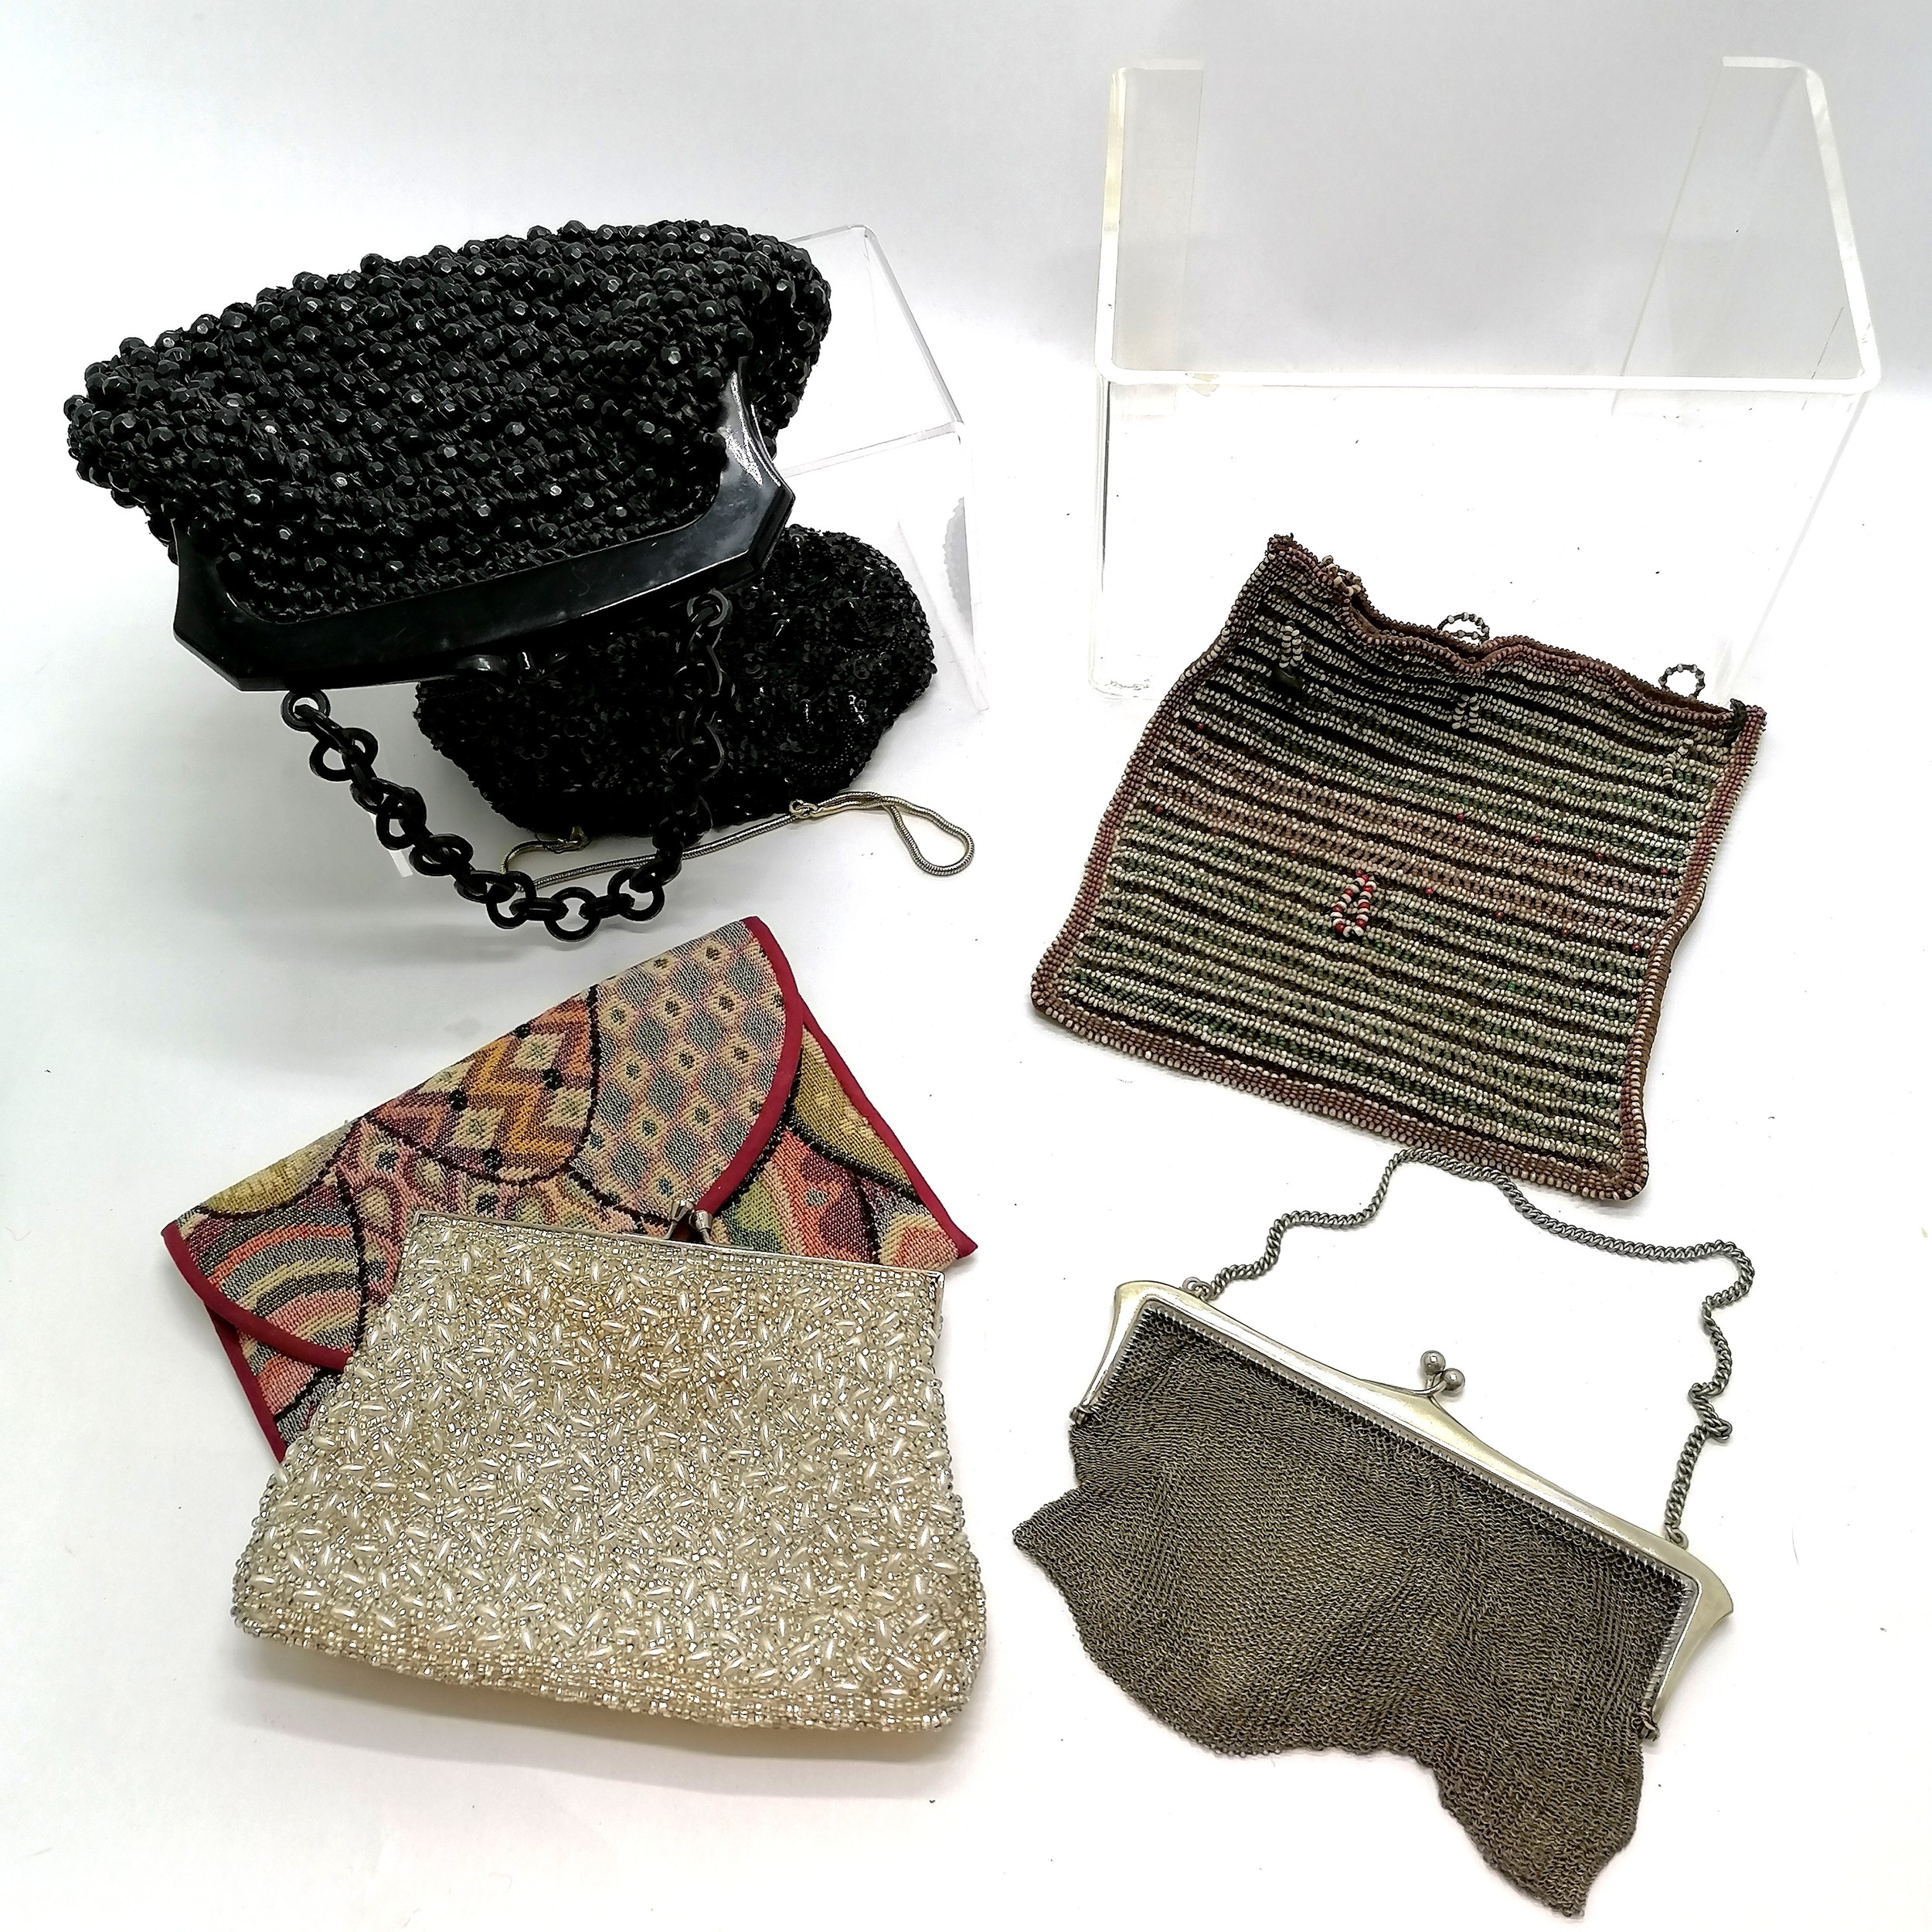 6 x vintage handbags / purses inc an ethnic beadwork (20cm square with some losses) ~ all have - Image 4 of 4